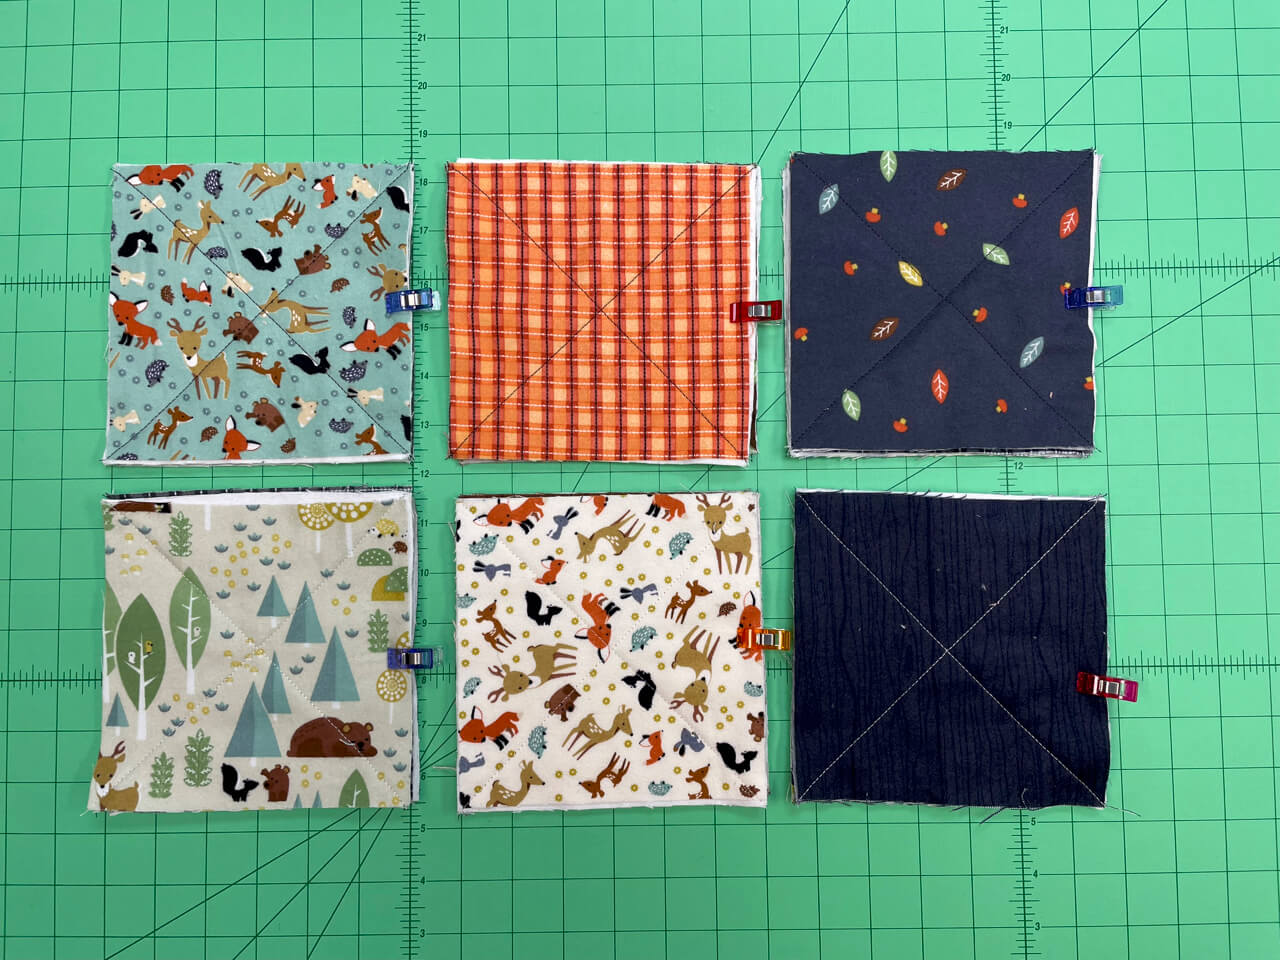 NEW! Woodland Flannel Fabric Collection Available at Nancy Zieman Productions at ShopNZP.com